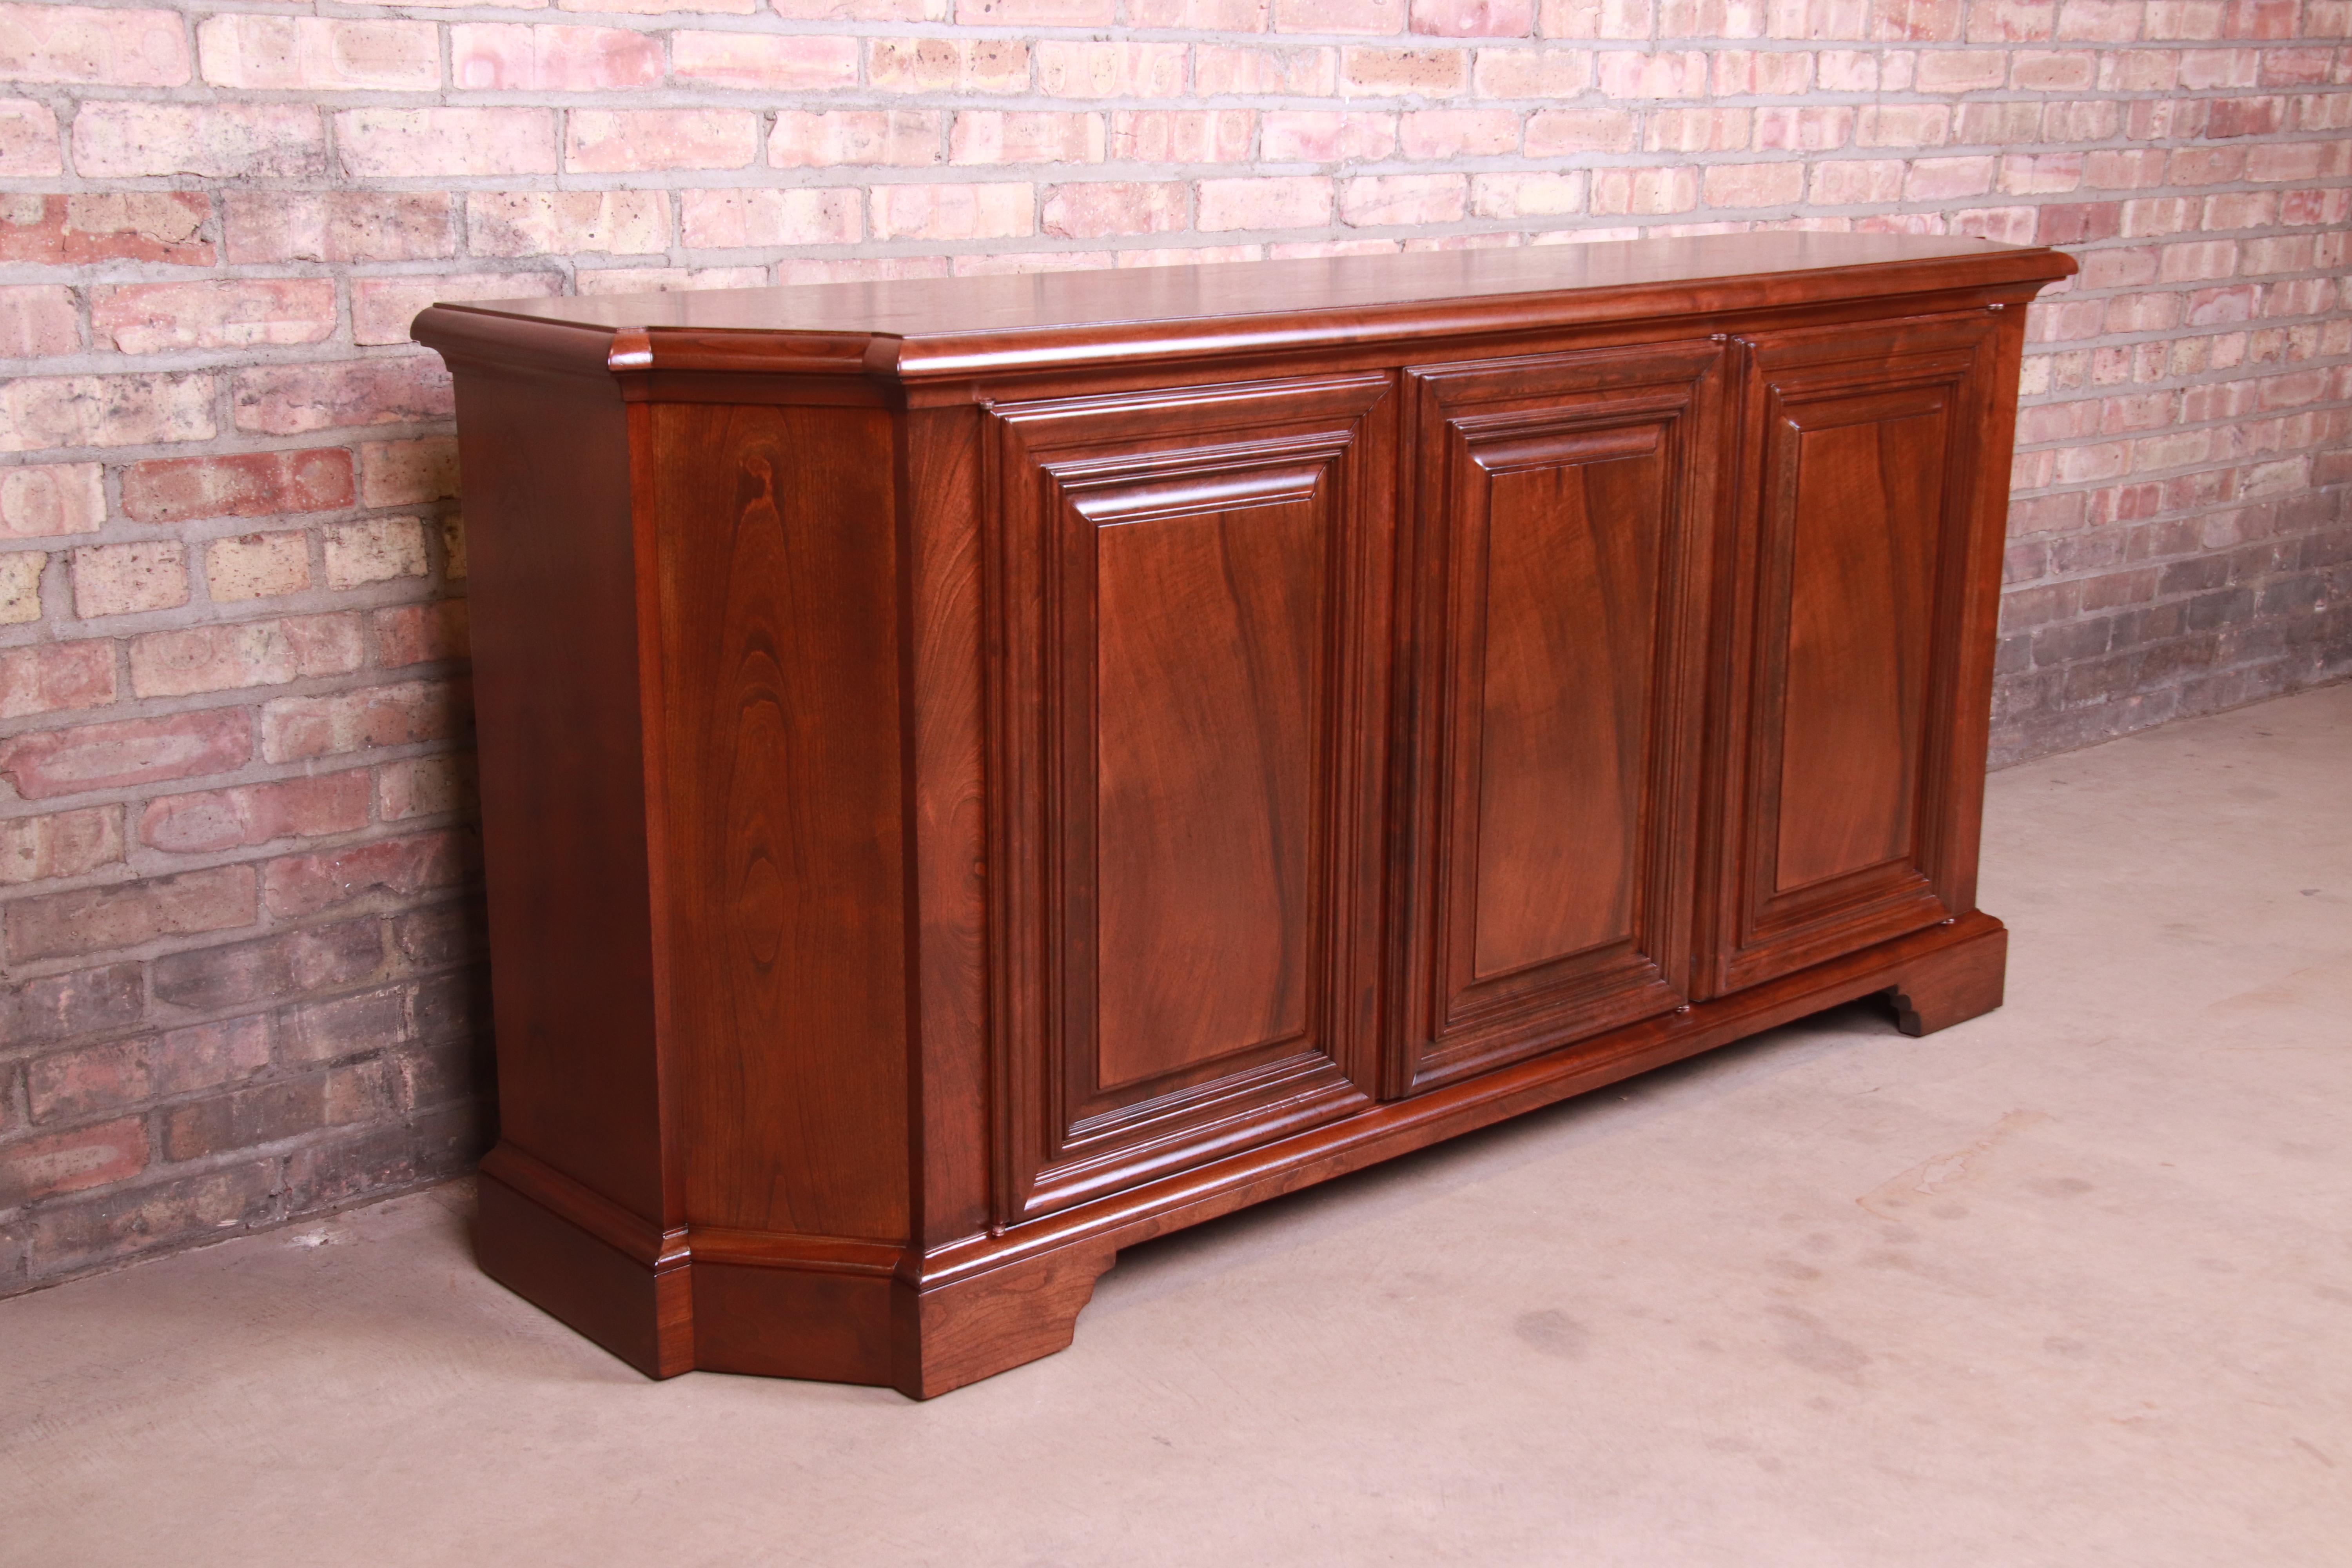 20th Century Baker Furniture French Regency Walnut Sideboard or Bar Cabinet, Newly Refinished